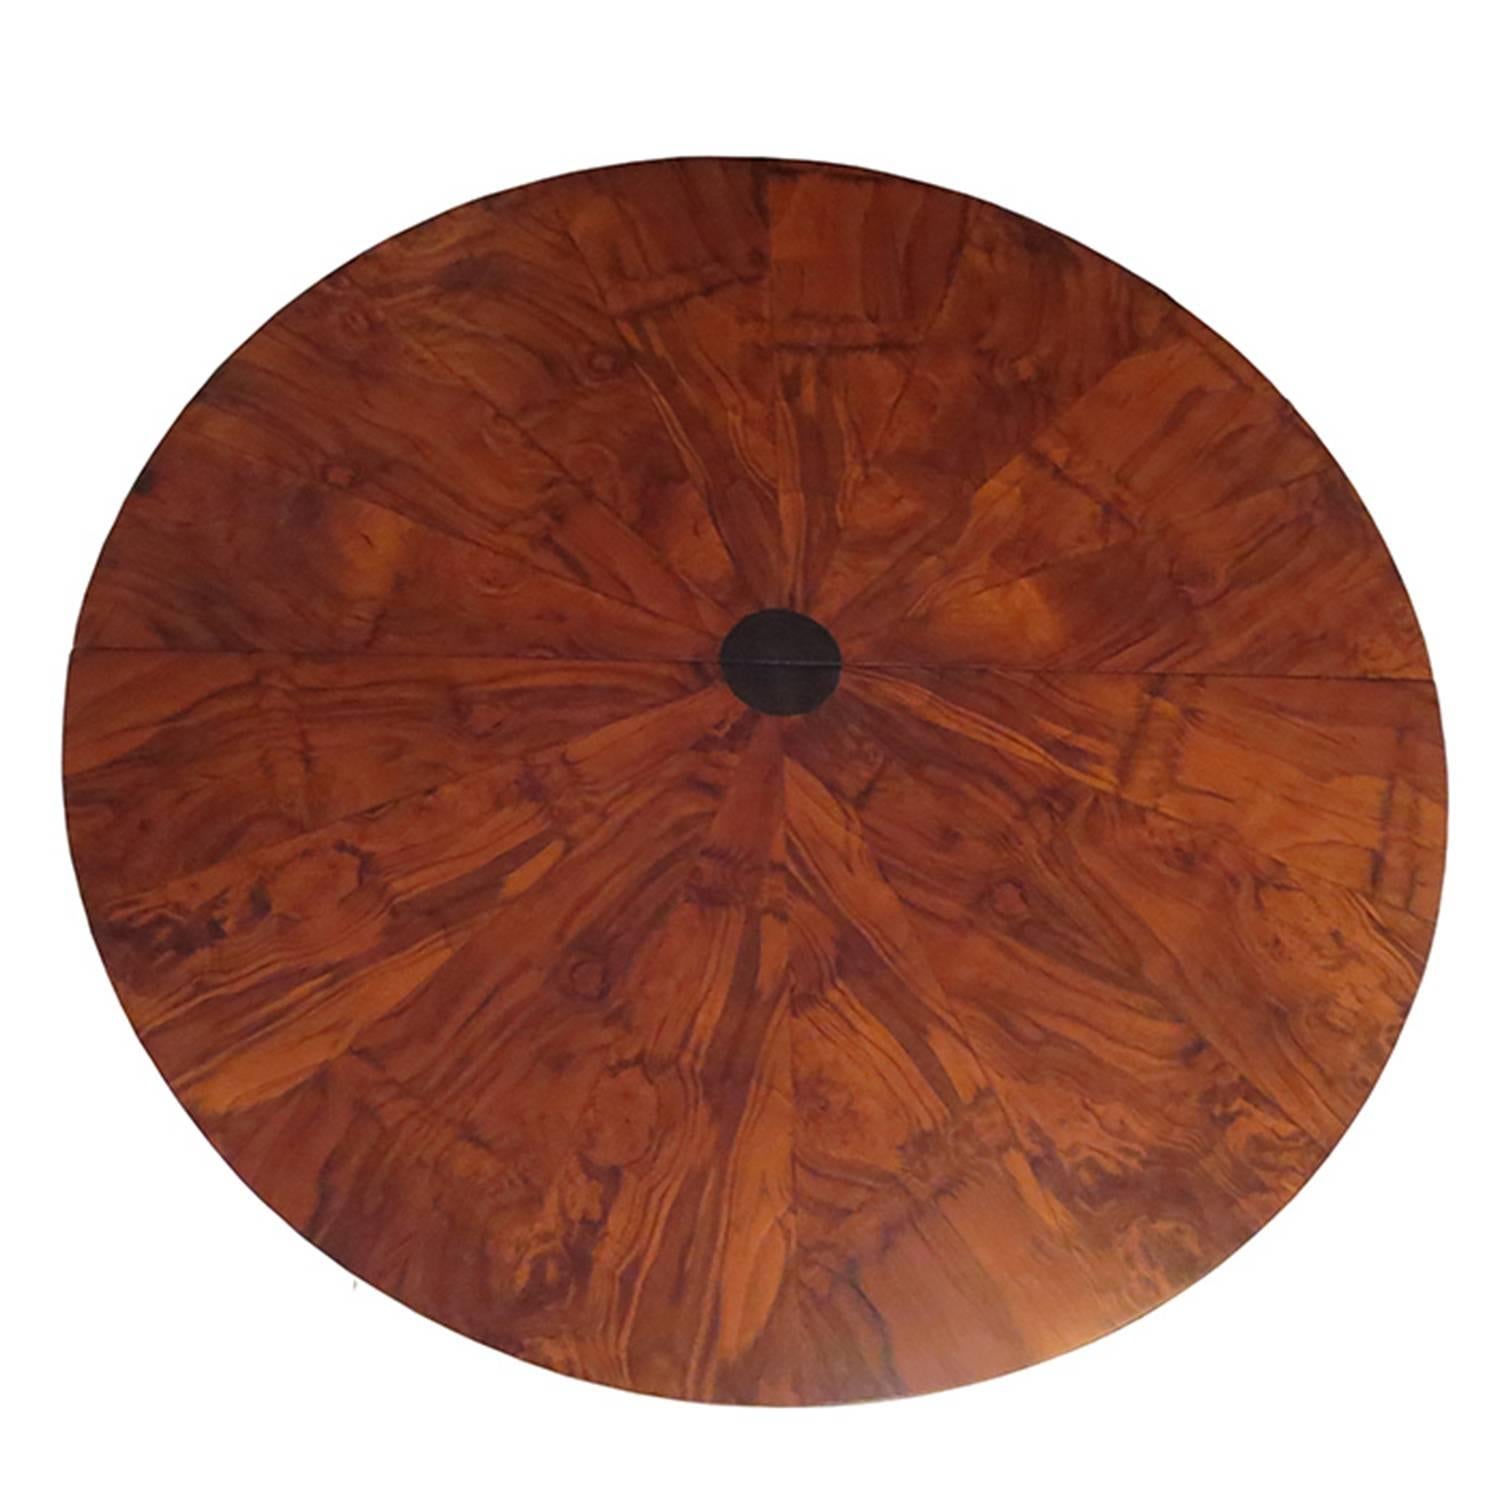 This incredible dining table was designed by Paul Evans in the 1970s as part of the “Cityscape” line. The top is a highly figured burled wood grain in a sunburst pattern with an ebonized circular center. With the extension in place, the center